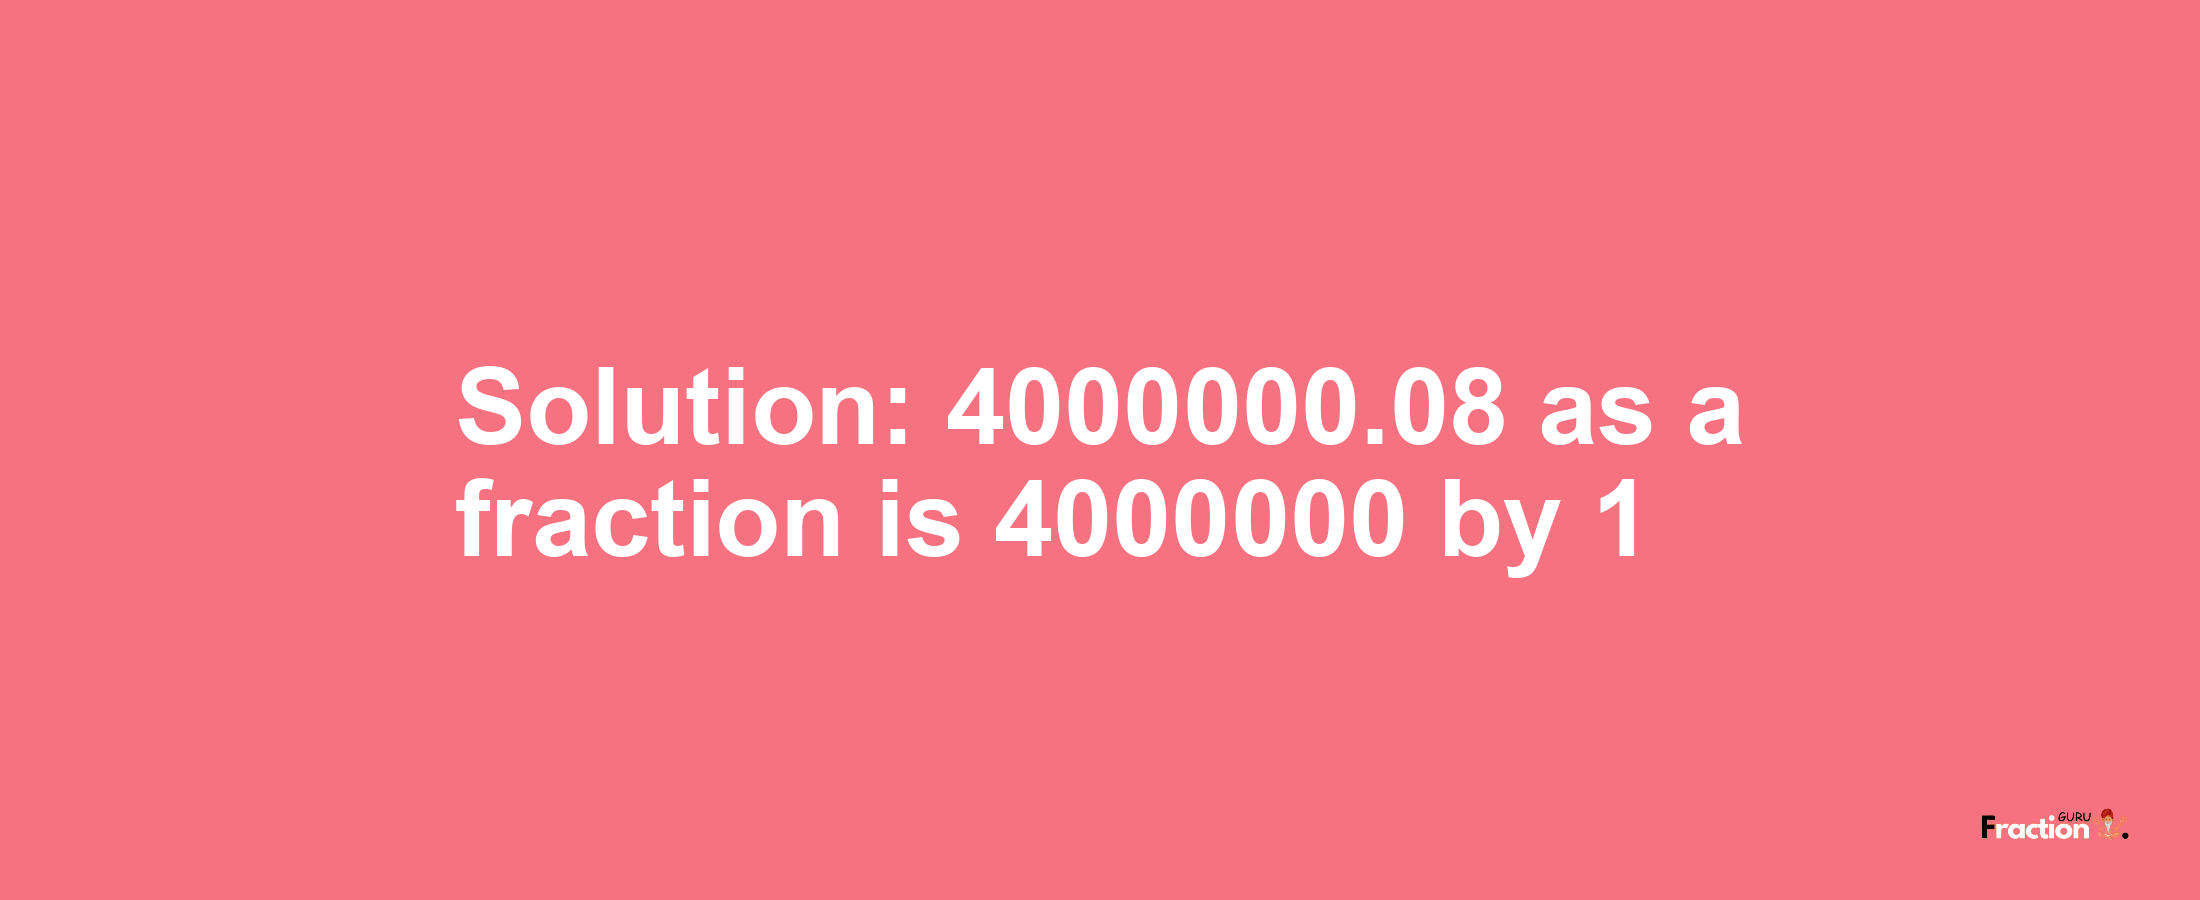 Solution:4000000.08 as a fraction is 4000000/1